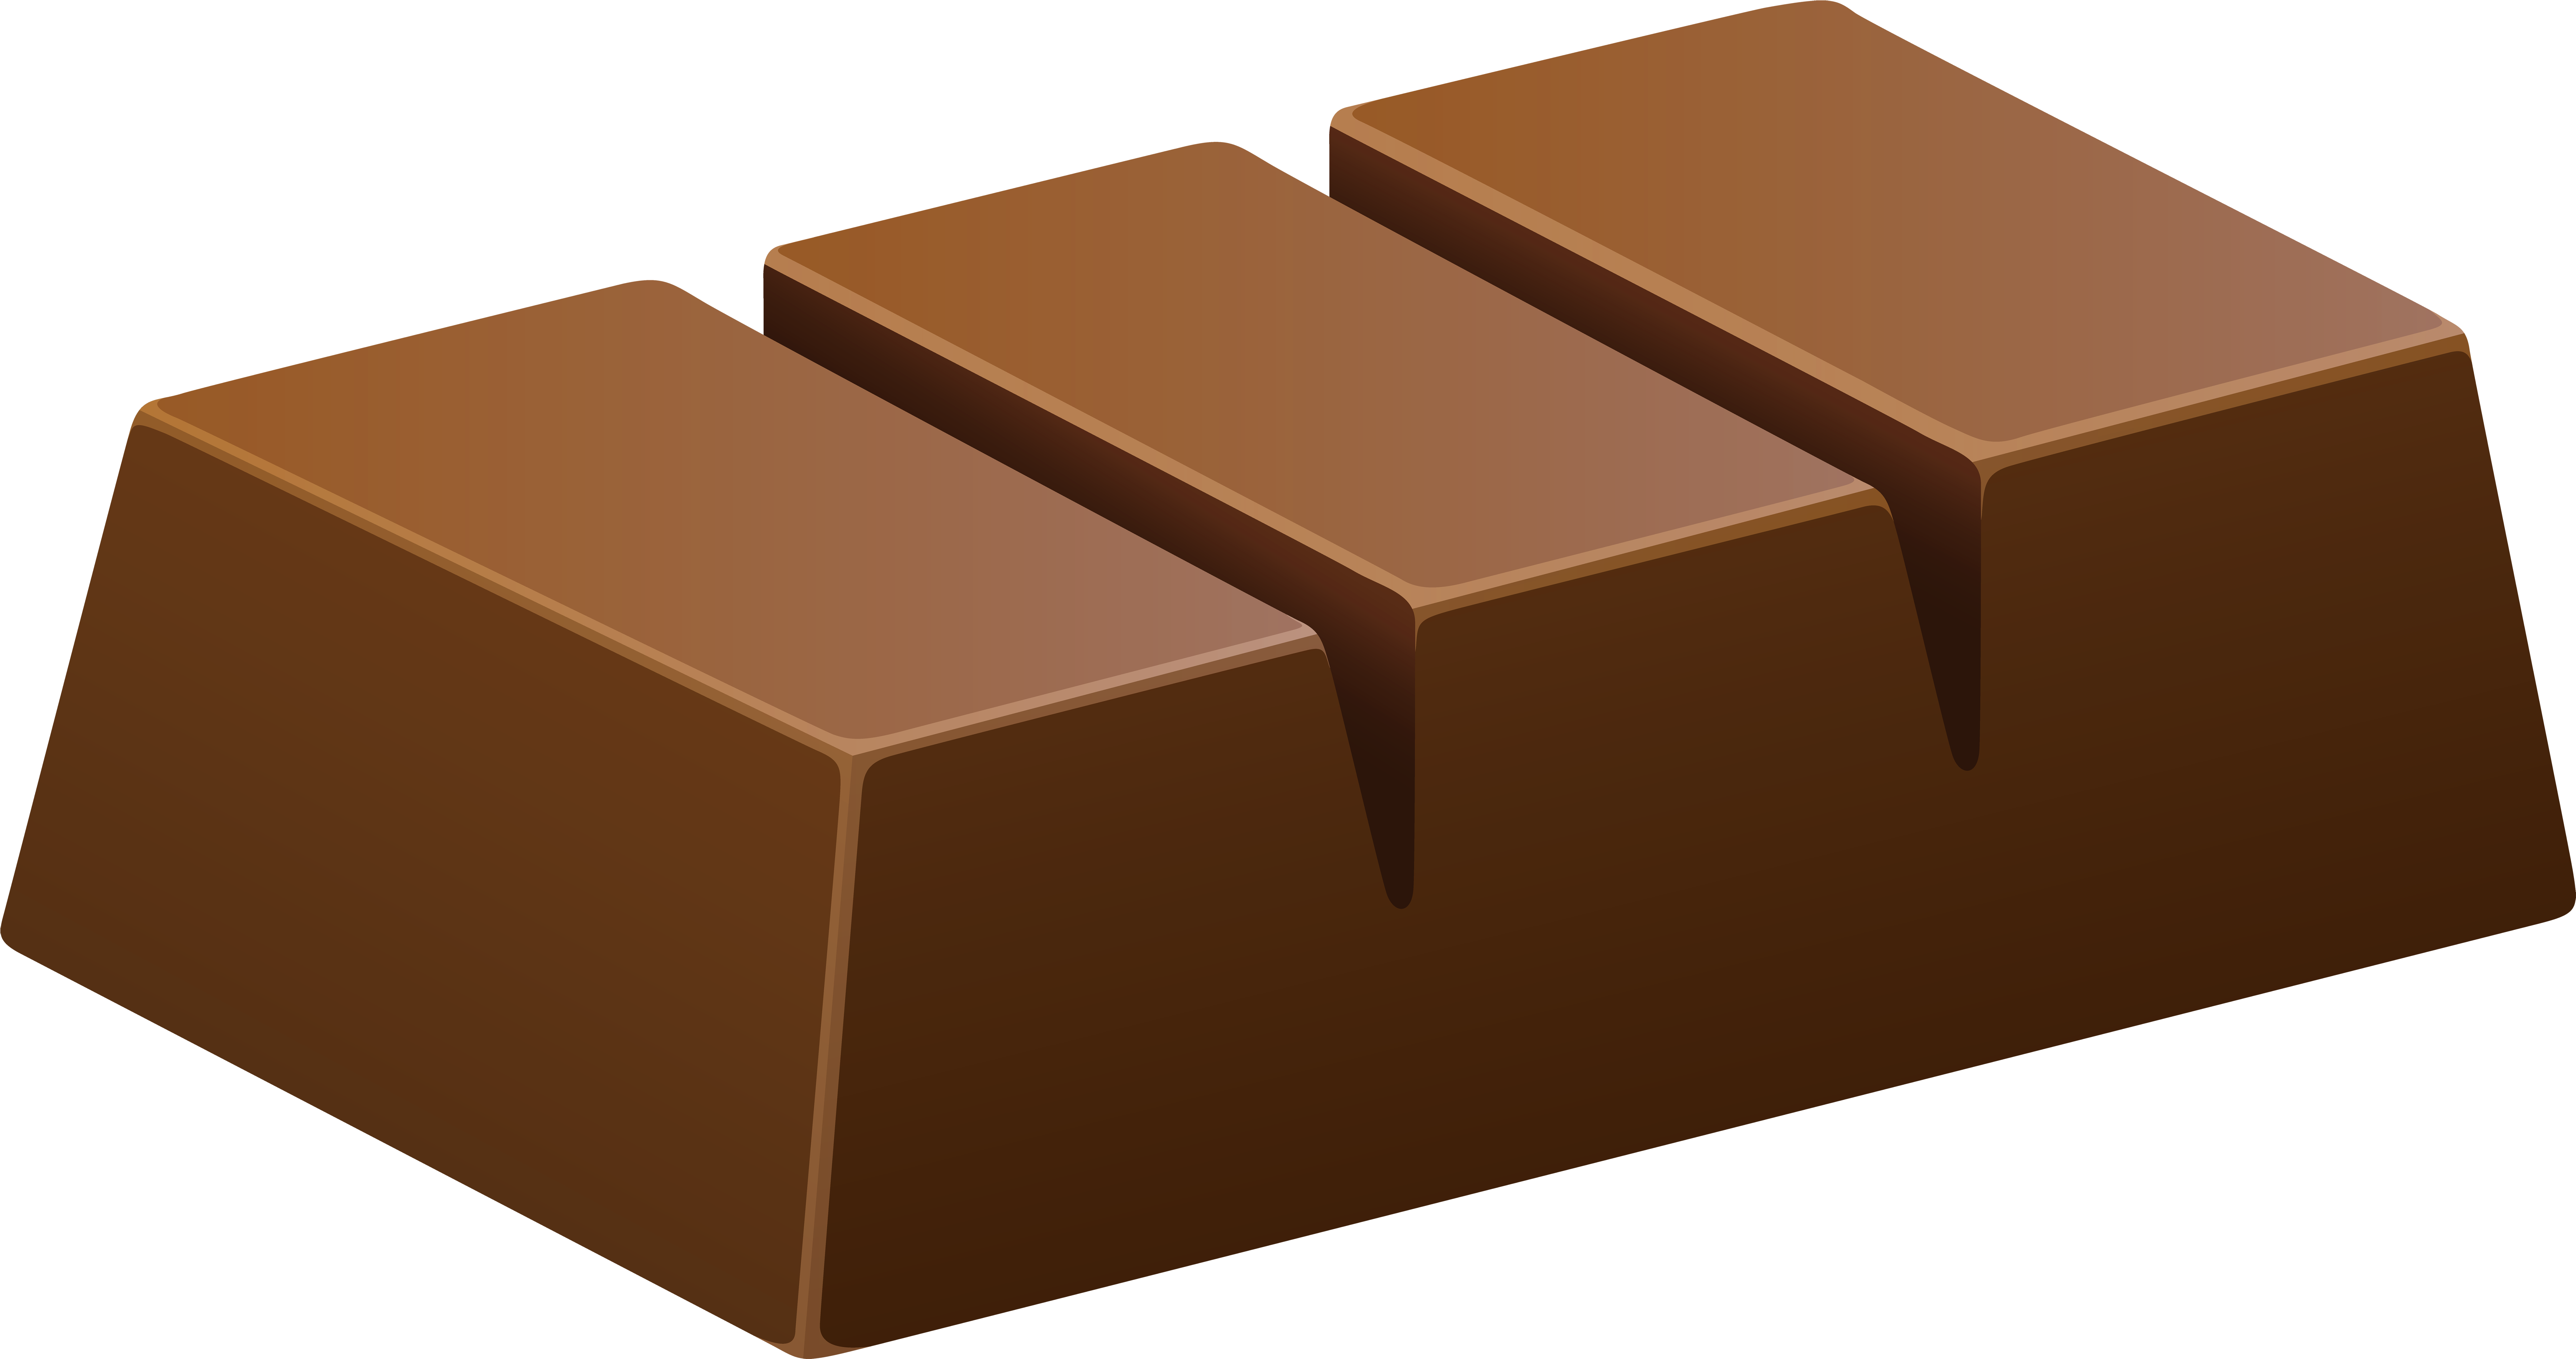 Download Chocolate bar clipart transparent background pictures on Cliparts Pub 2020! 🔝